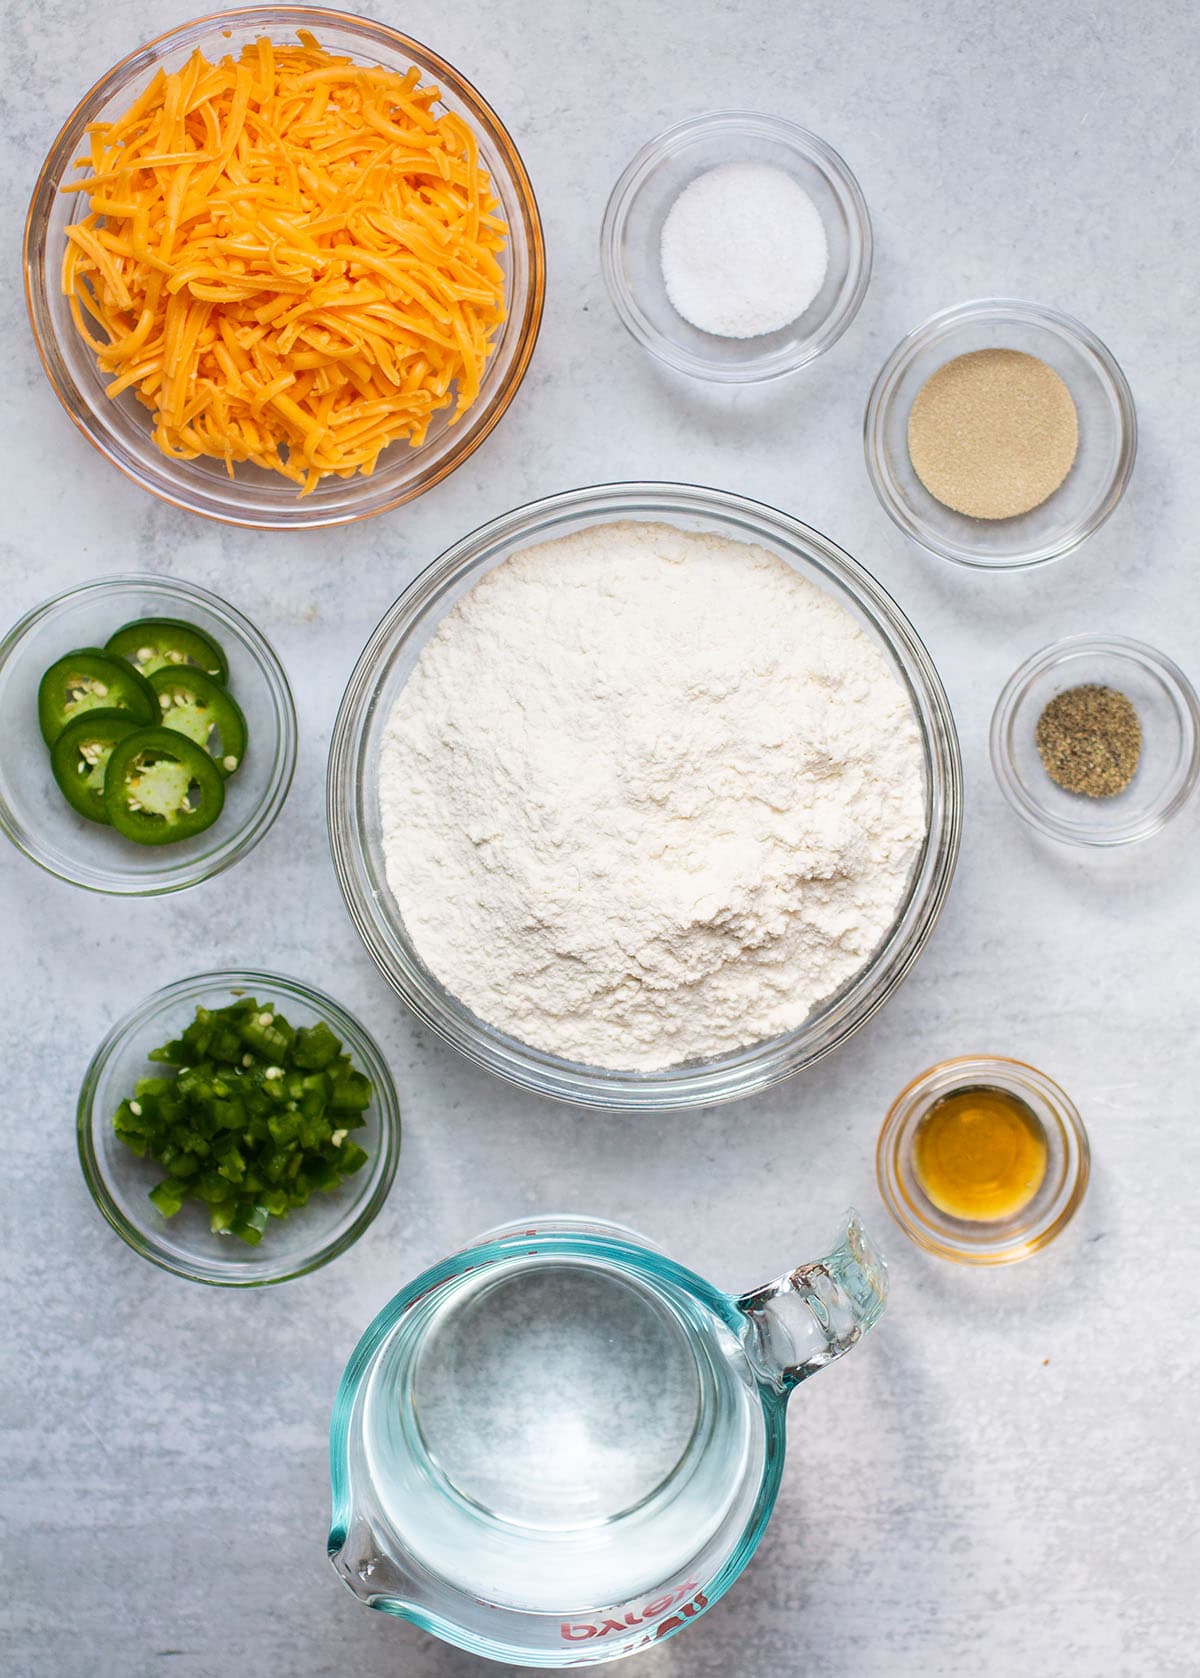 Jalapeno cheese bread ingredients, organized into individual glass bowls on a white table.